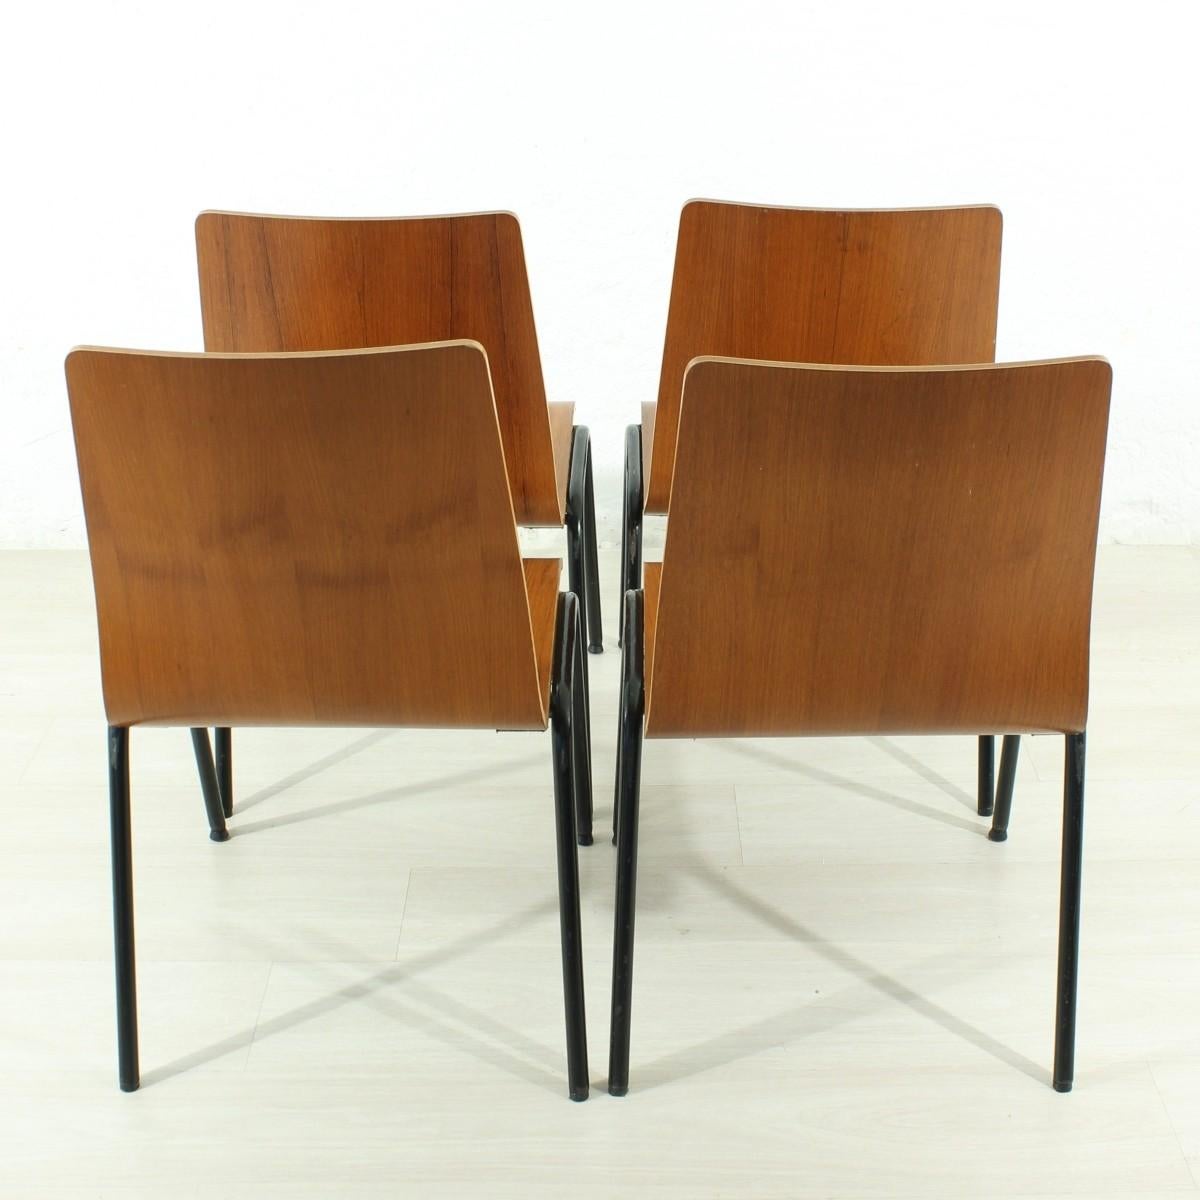 Set of 4 1960s Teak Chairs In Good Condition For Sale In Freiburg, DE